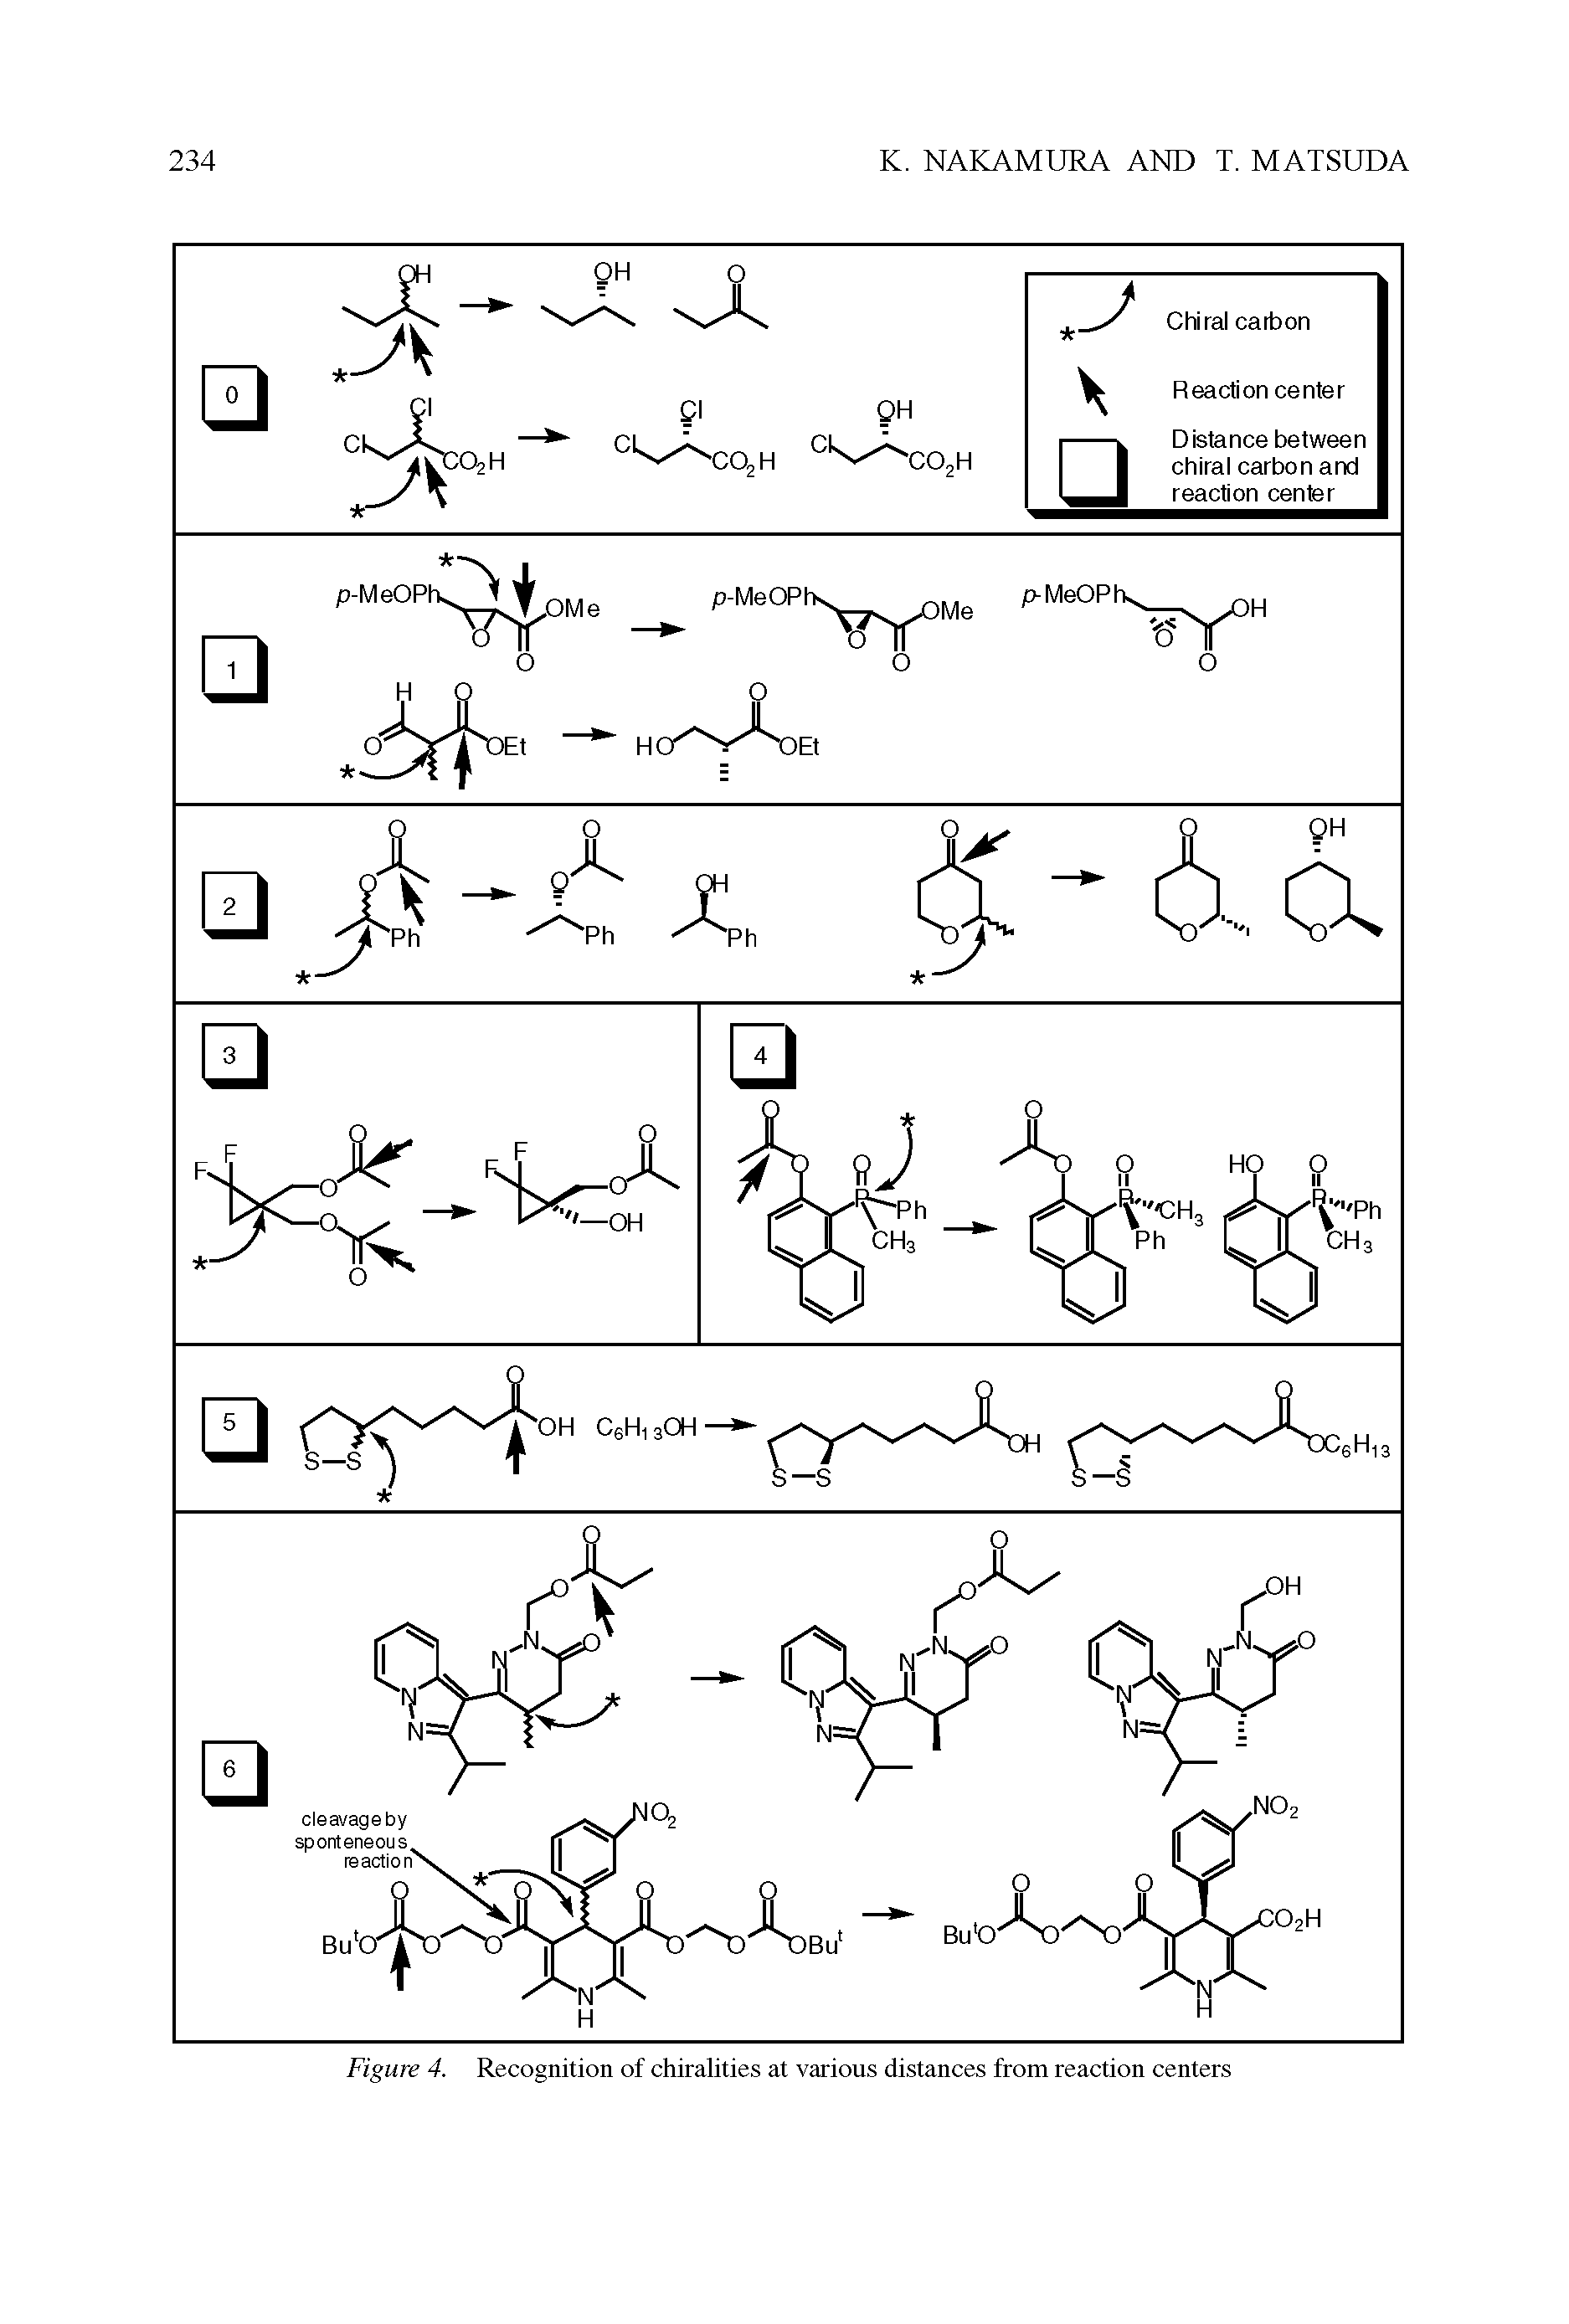 Figure 4. Recognition of chiralities at various distances from reaction centers...